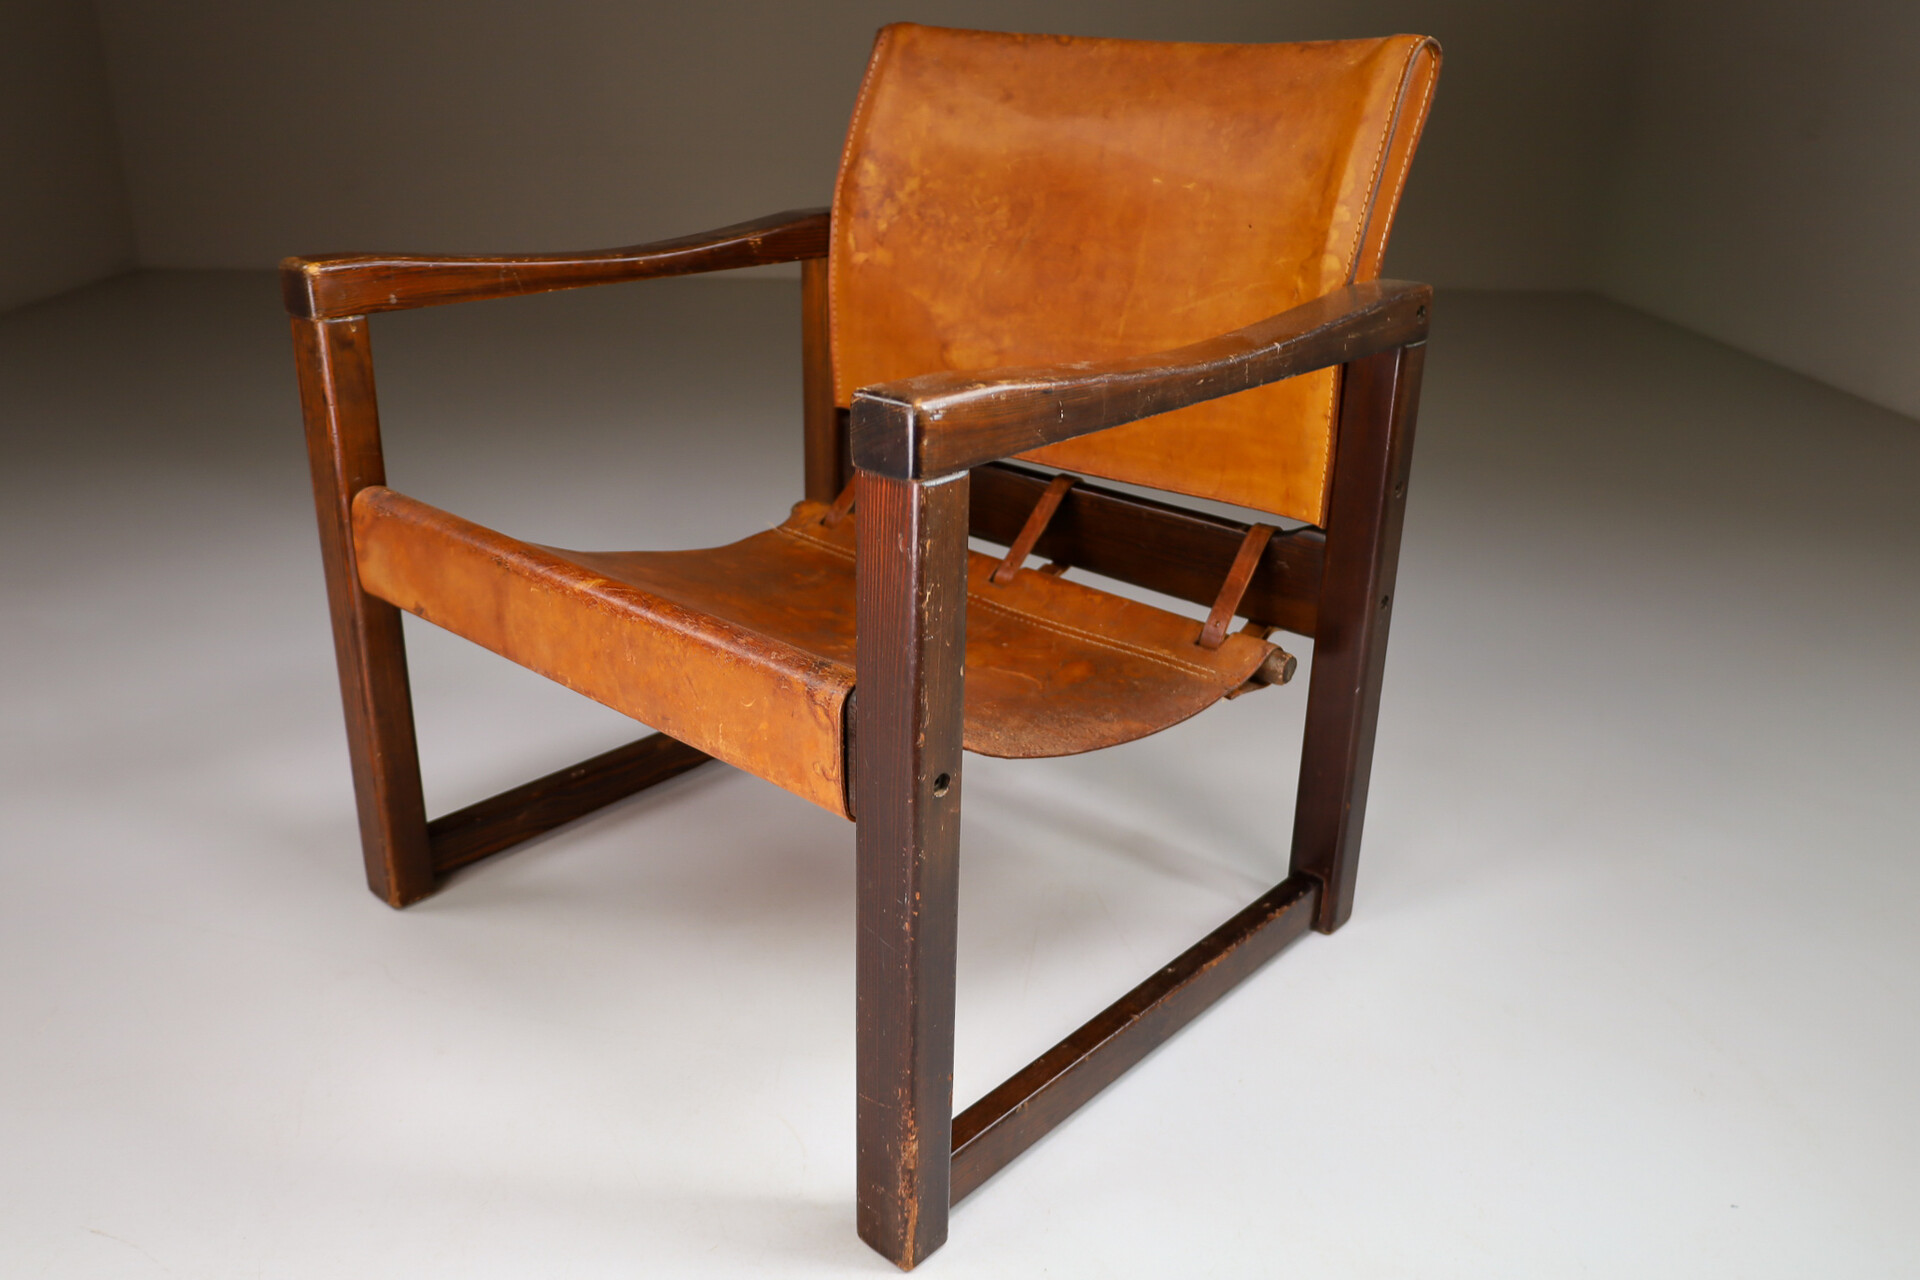 Chairs - Items by category - European ANTIQUES & DECORATIVE